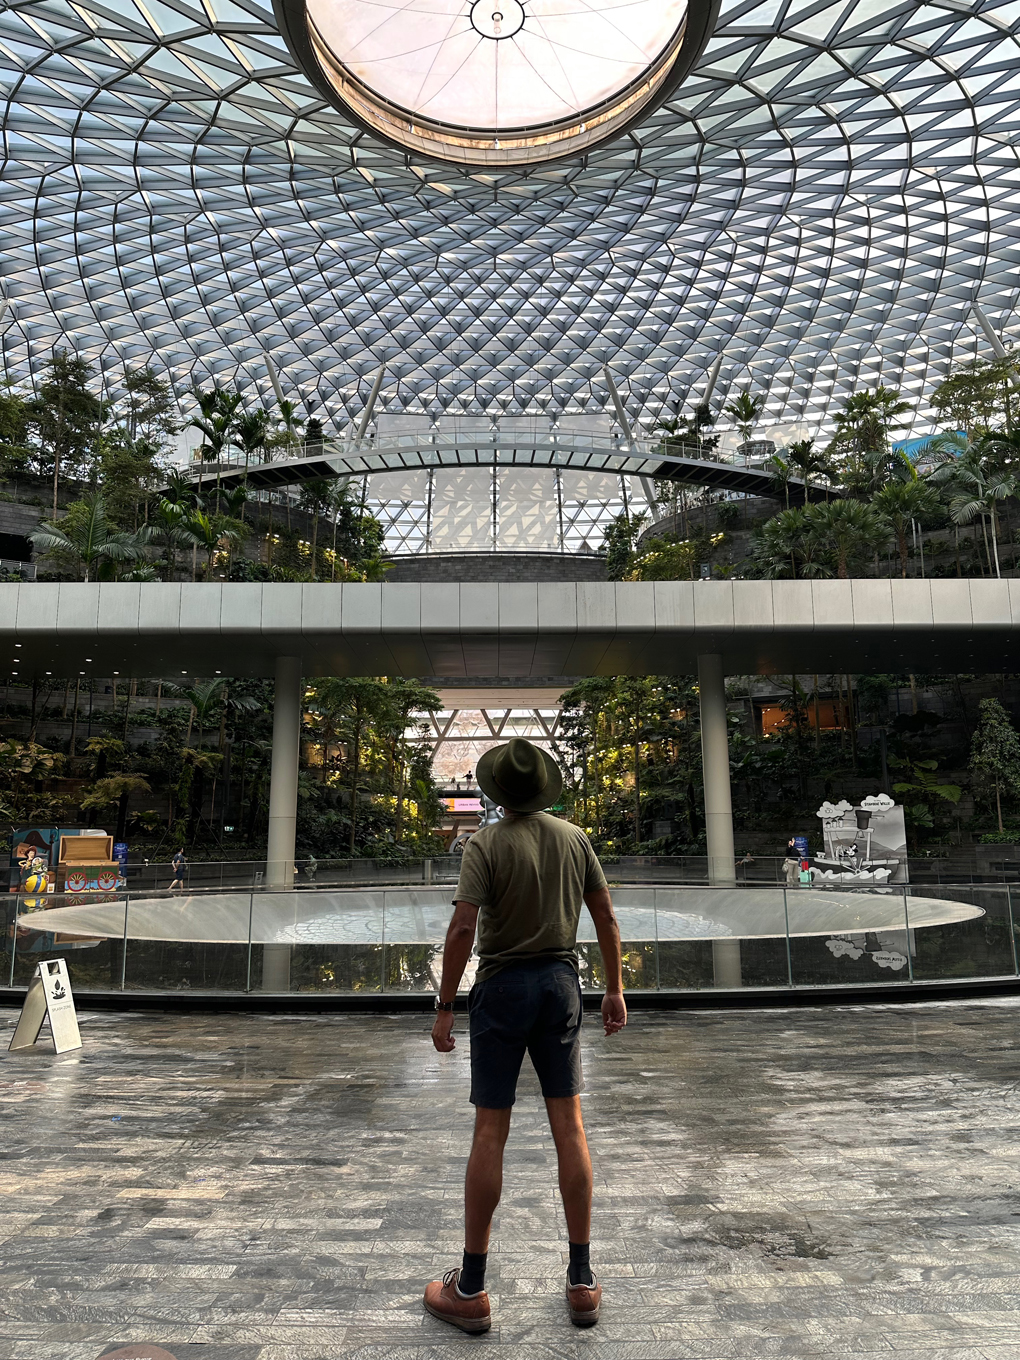 A man in an olive coloured t-shirt and blue shorts with a green felt hat photographed from behind. The inside of a domed structure ahead with an inactive water fountain.